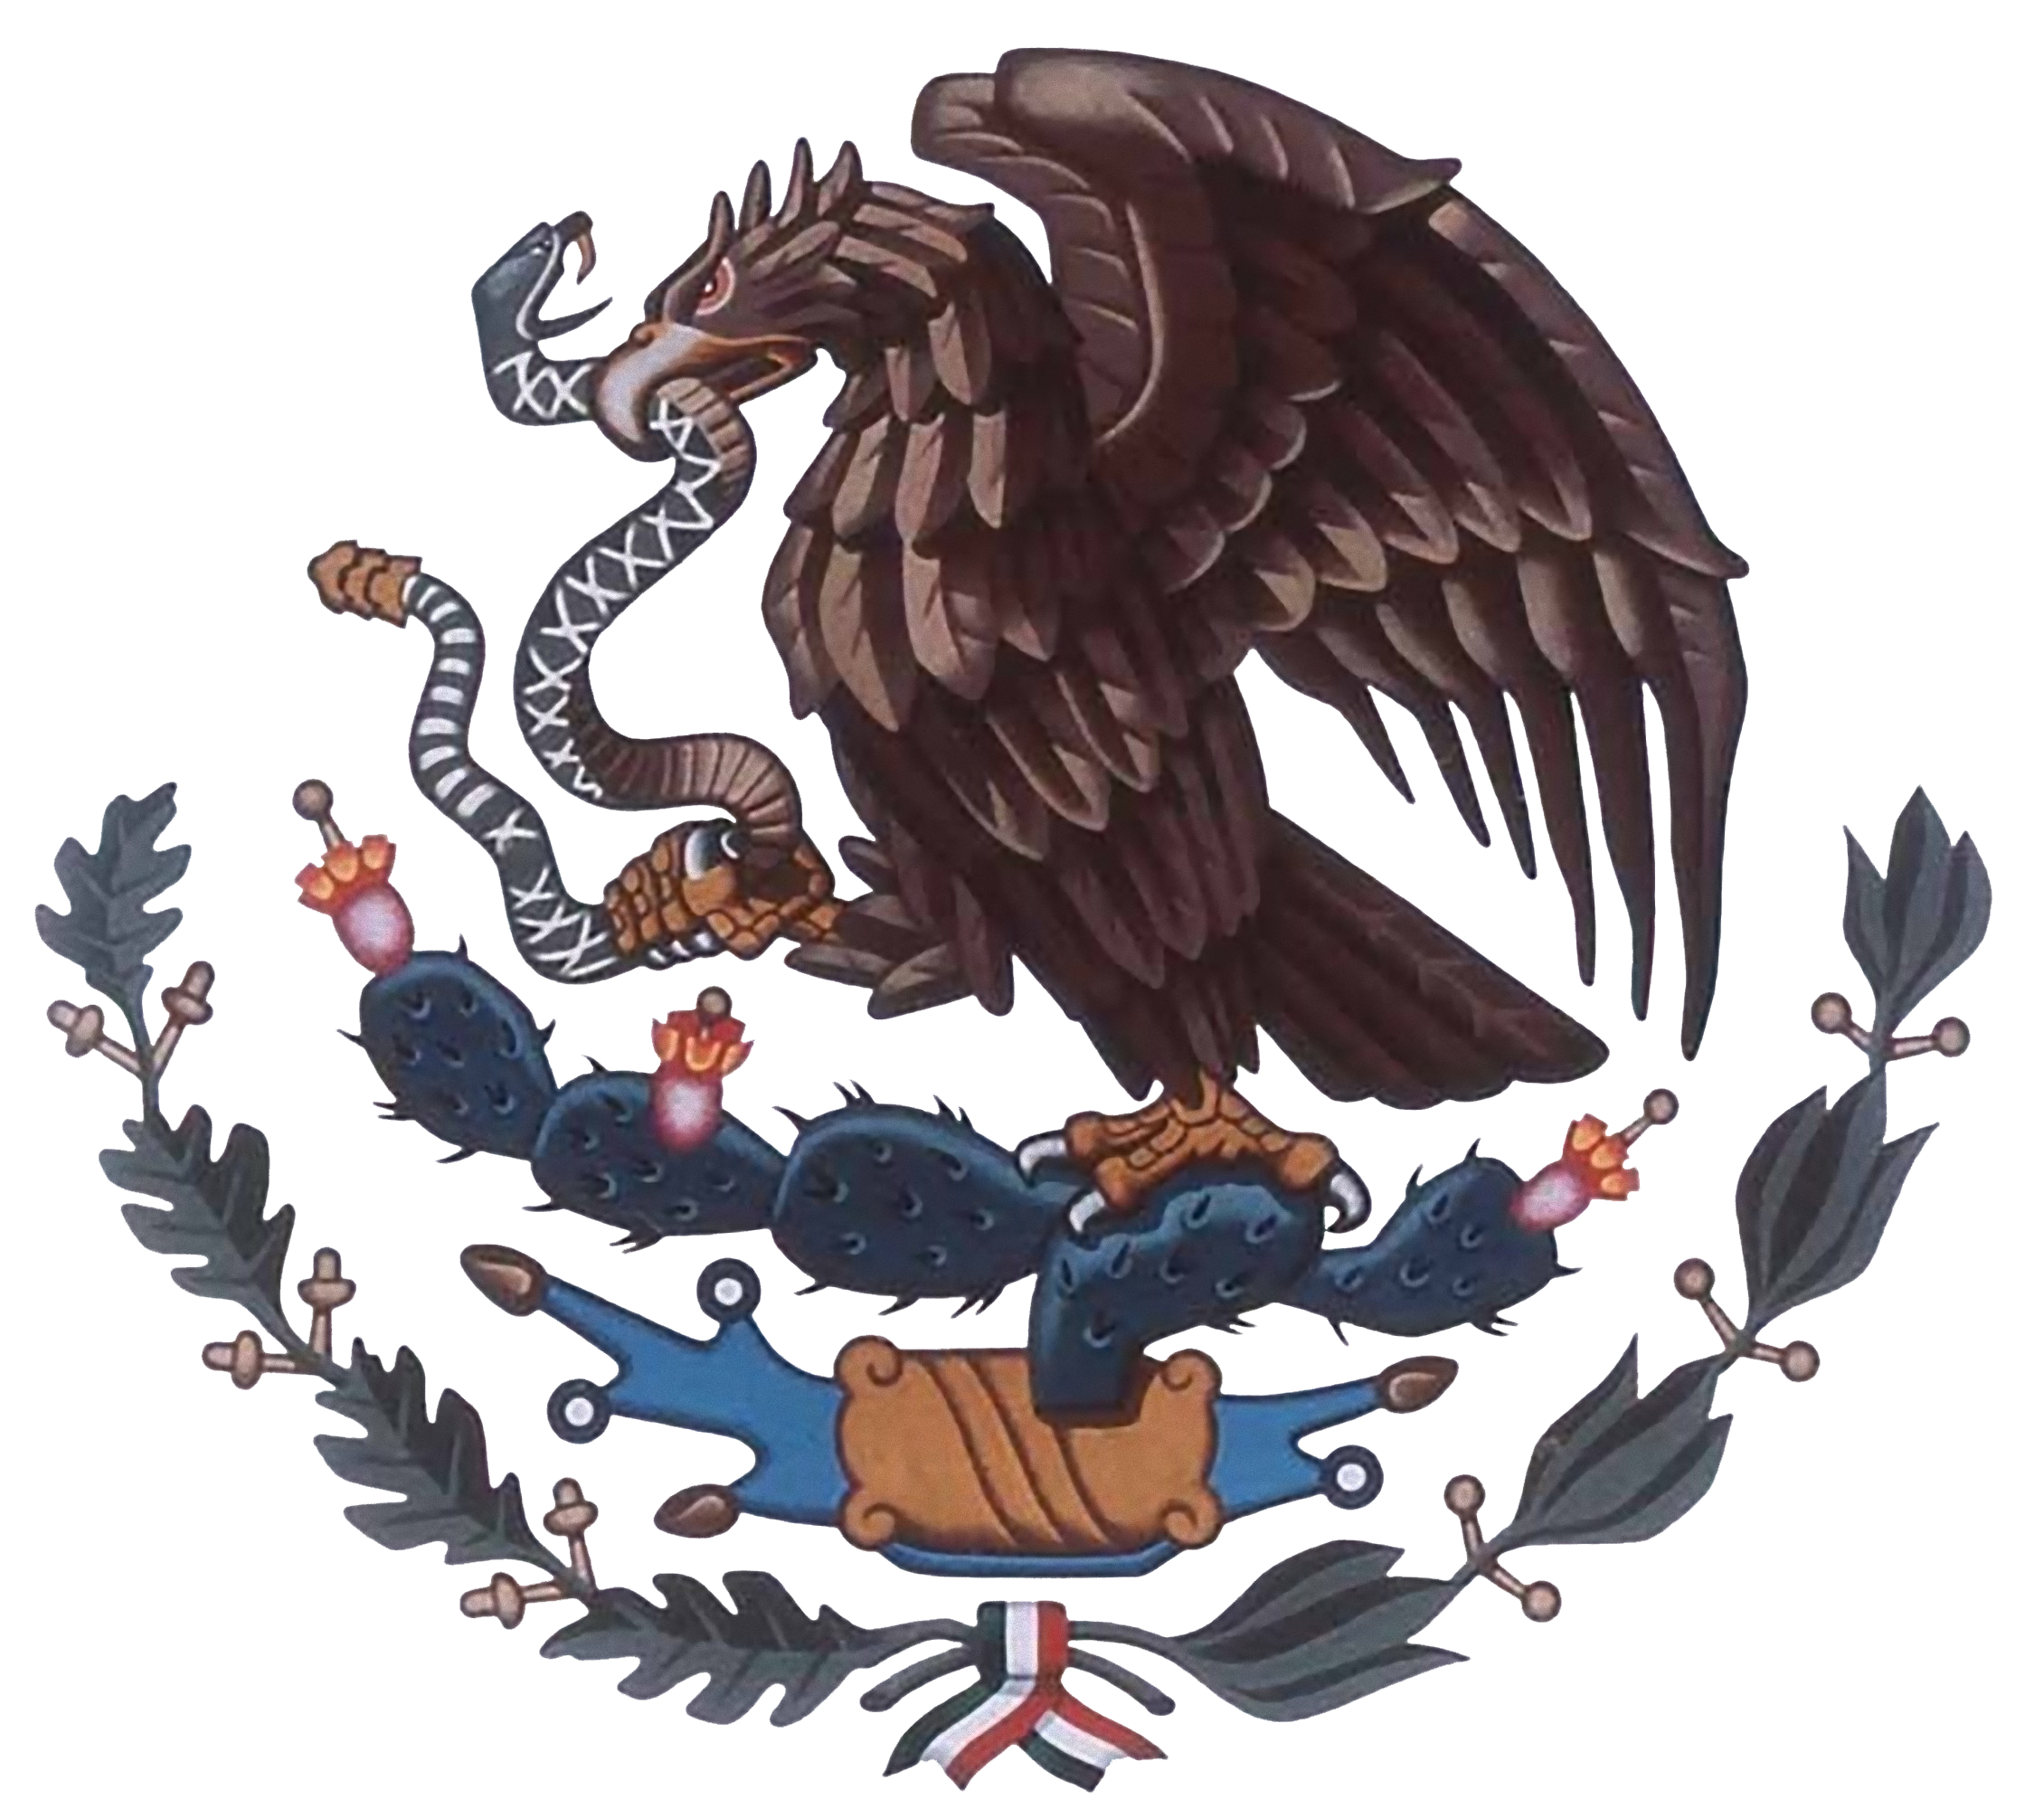 National coats of arms of Mexico.